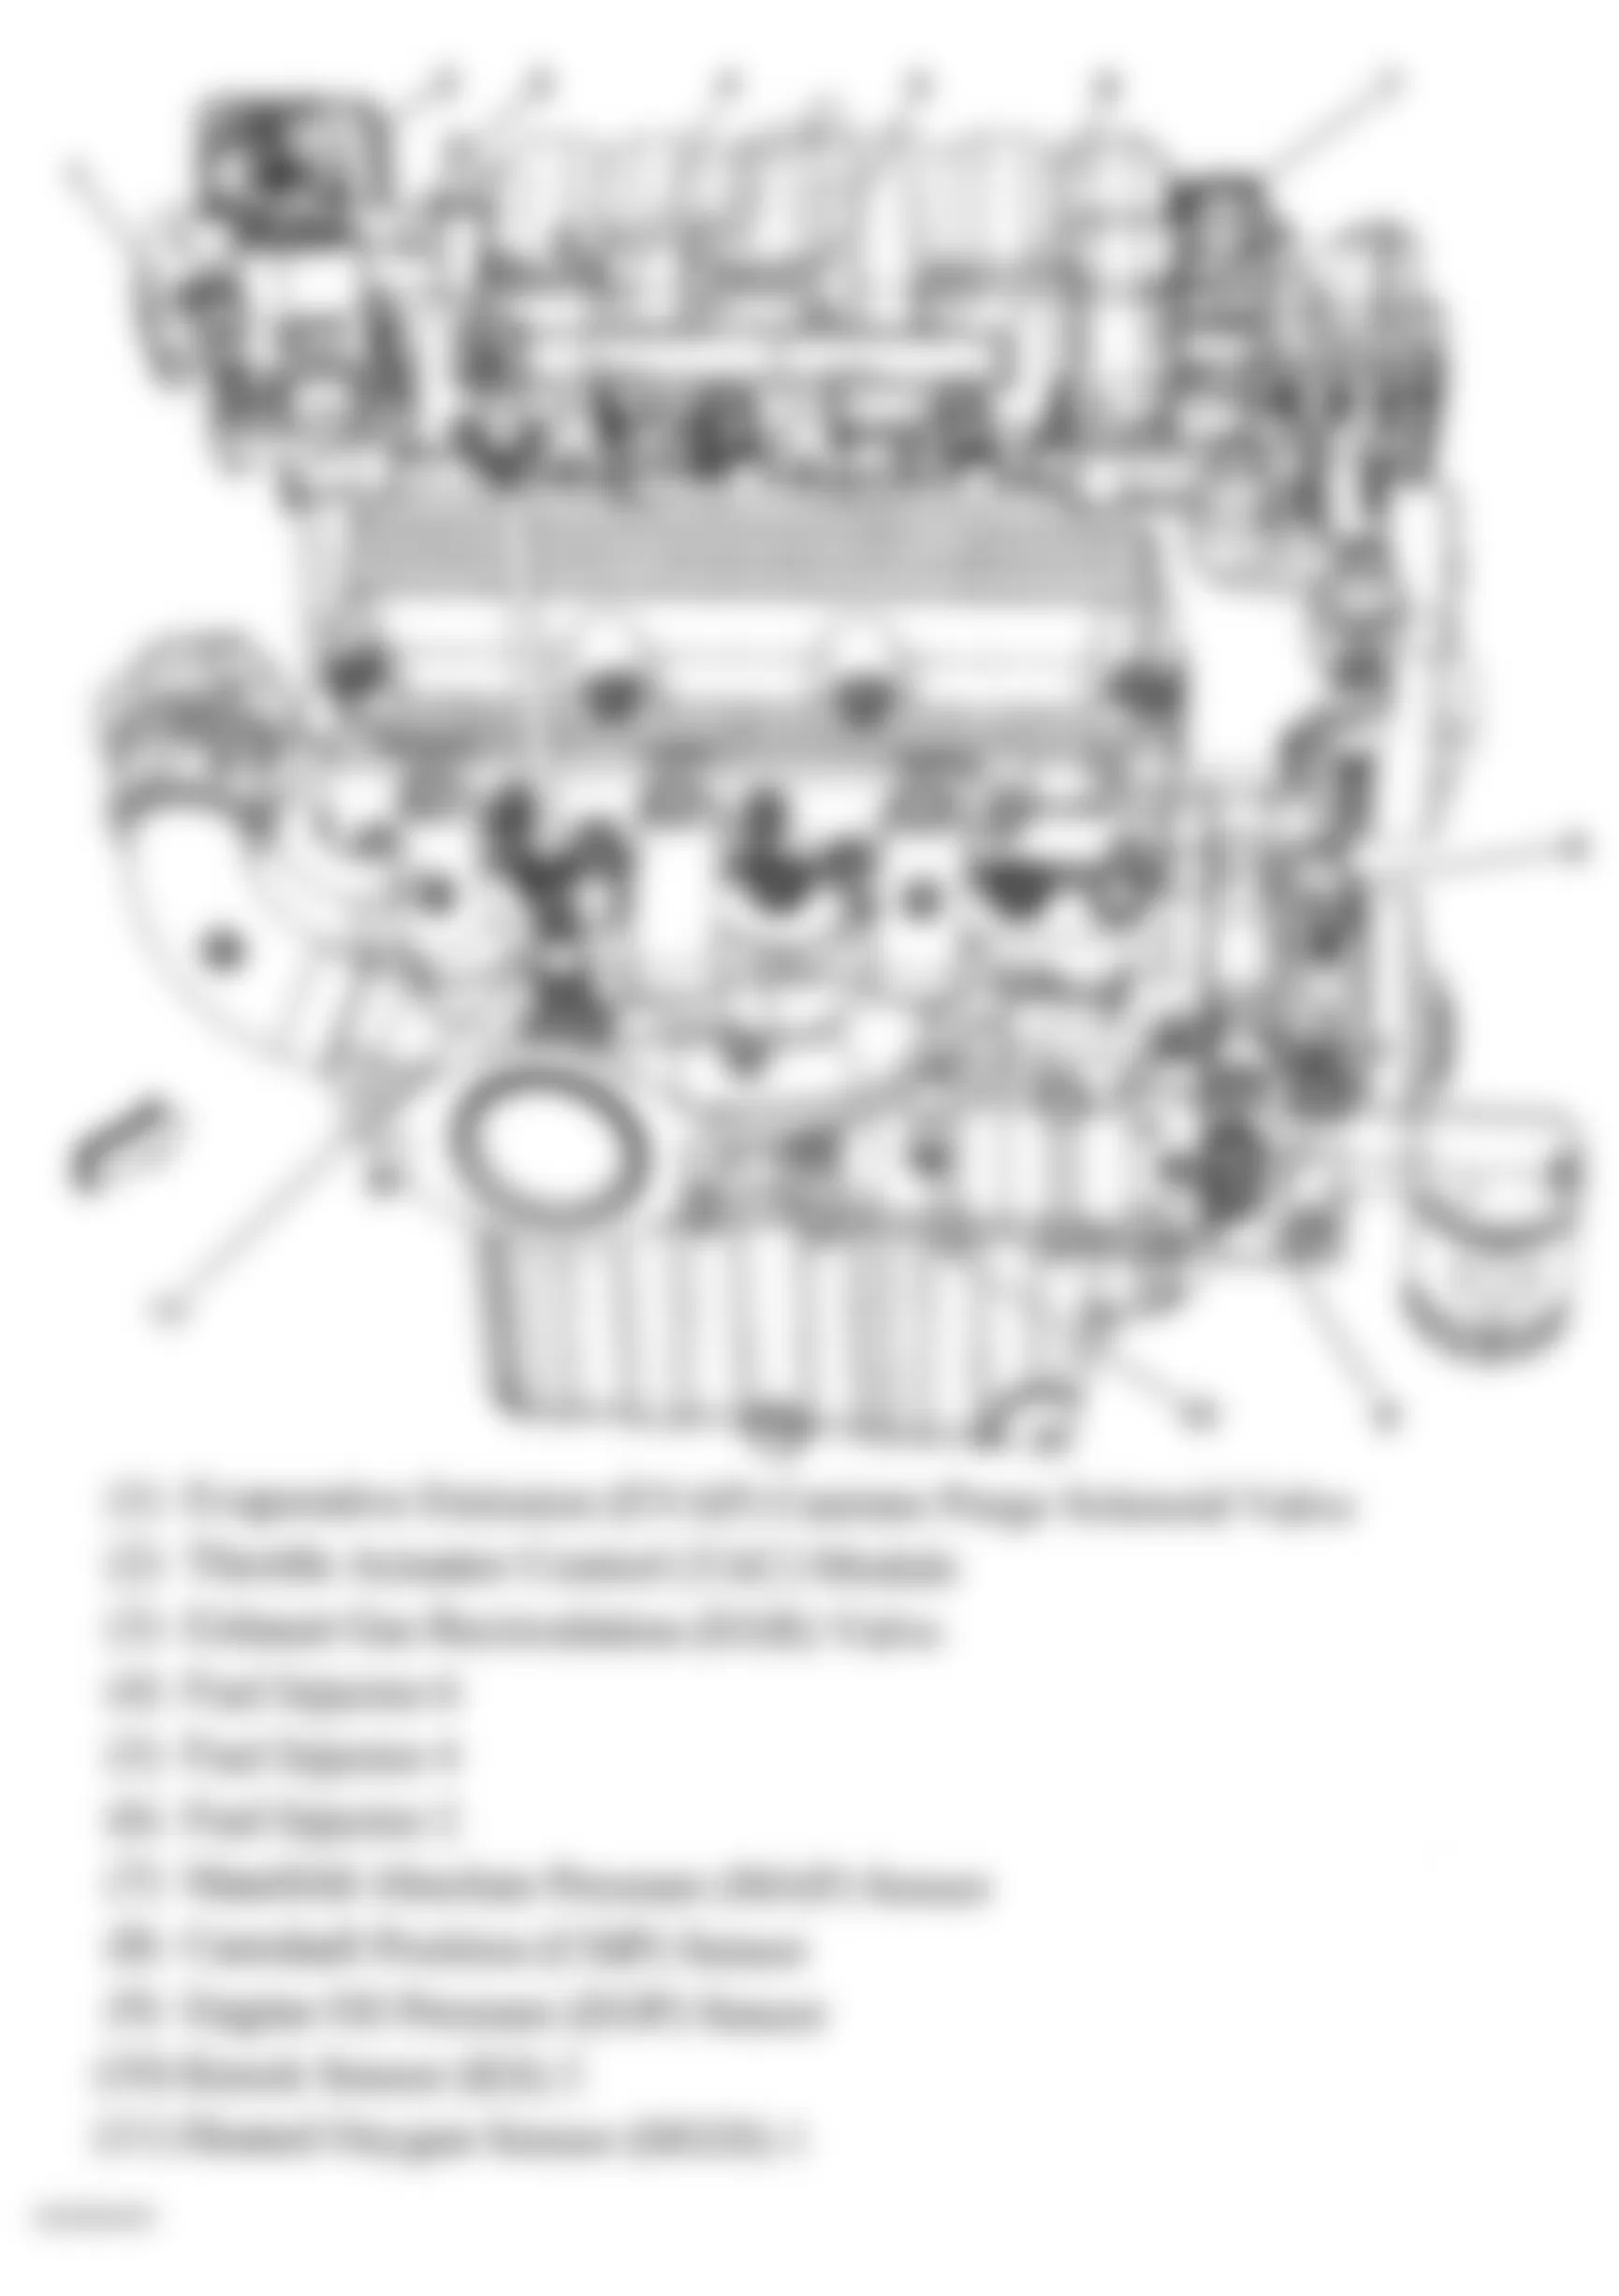 Buick LaCrosse CXL 2007 - Component Locations -  Right Side Of Engine (3.8L)